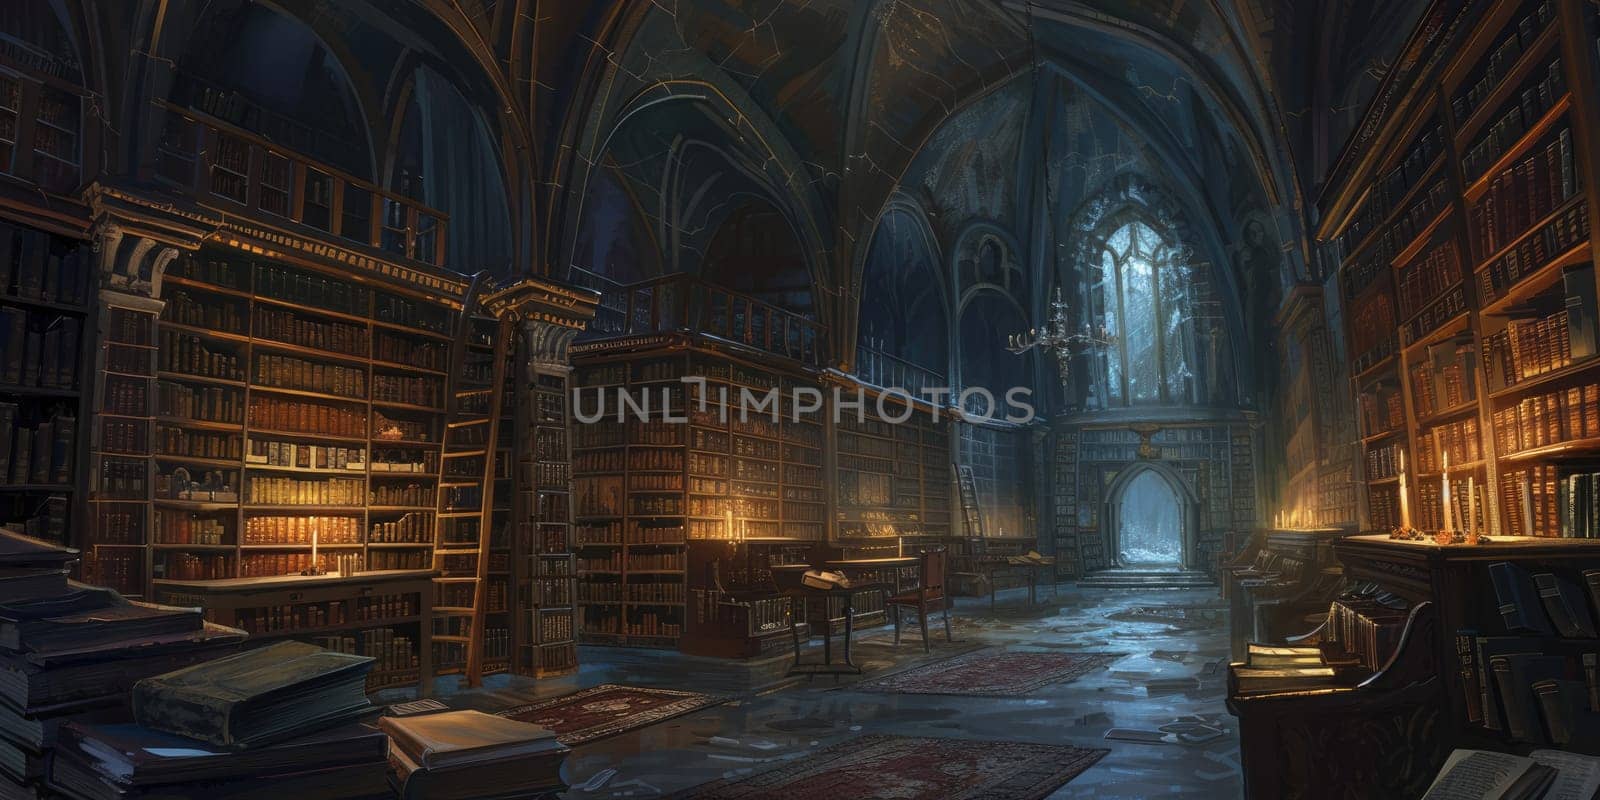 An ancient library with towering bookshelves, hidden alcoves. Resplendent. by biancoblue